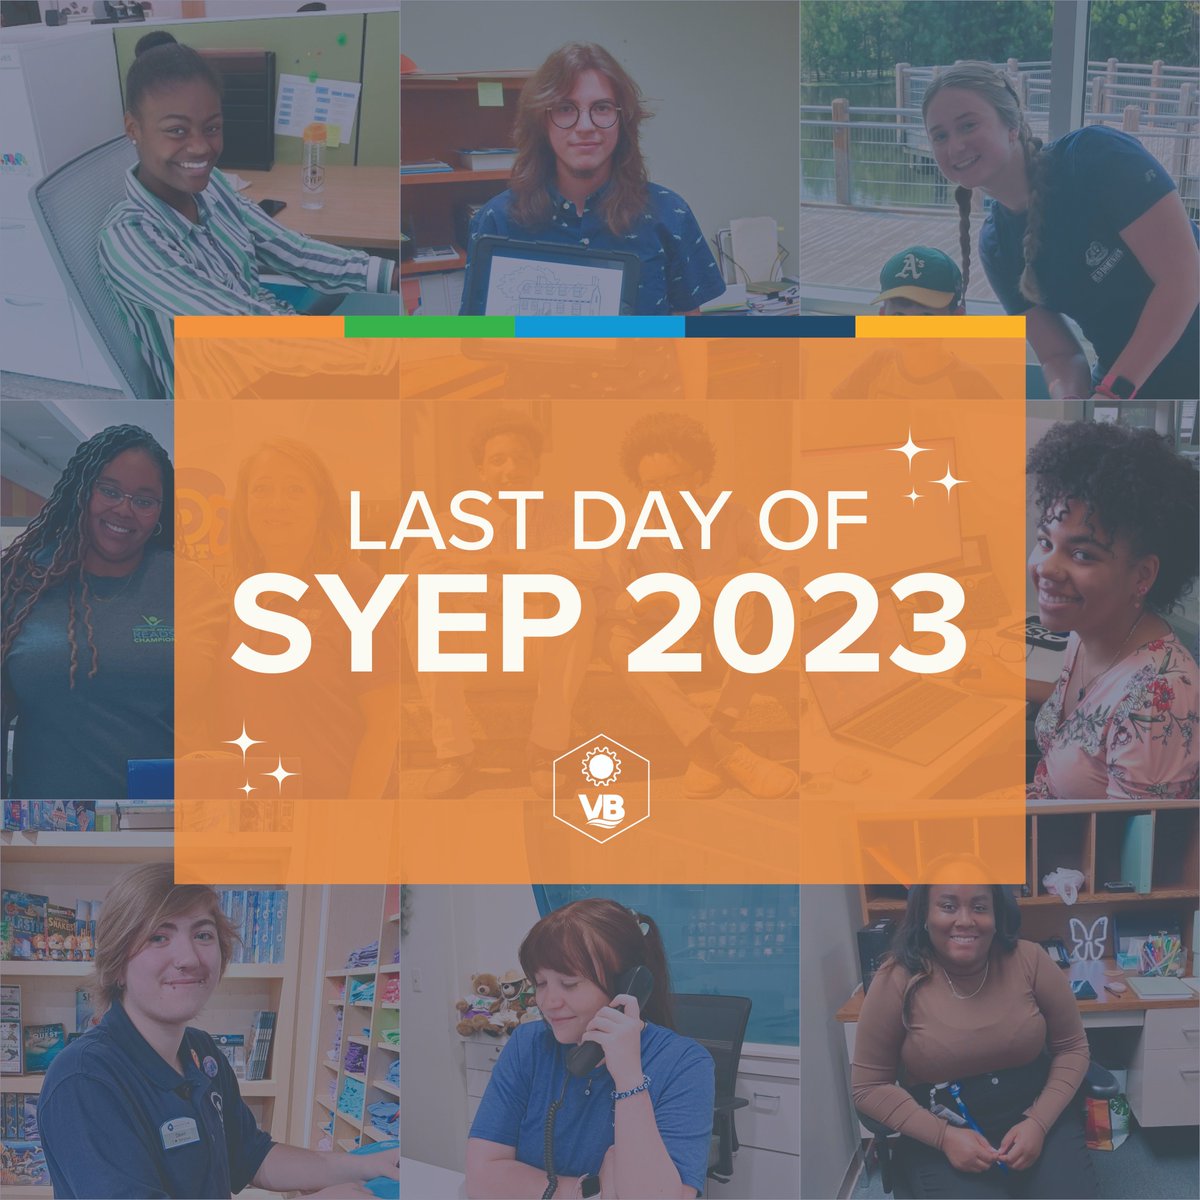 Today is the last day of SYEP 2023! We hope you had an amazing experience and learned so many new skills! Have a great summer & school year! #vbsyep #vbsyep2023 #virginiabeach #summerjob #youthemployment